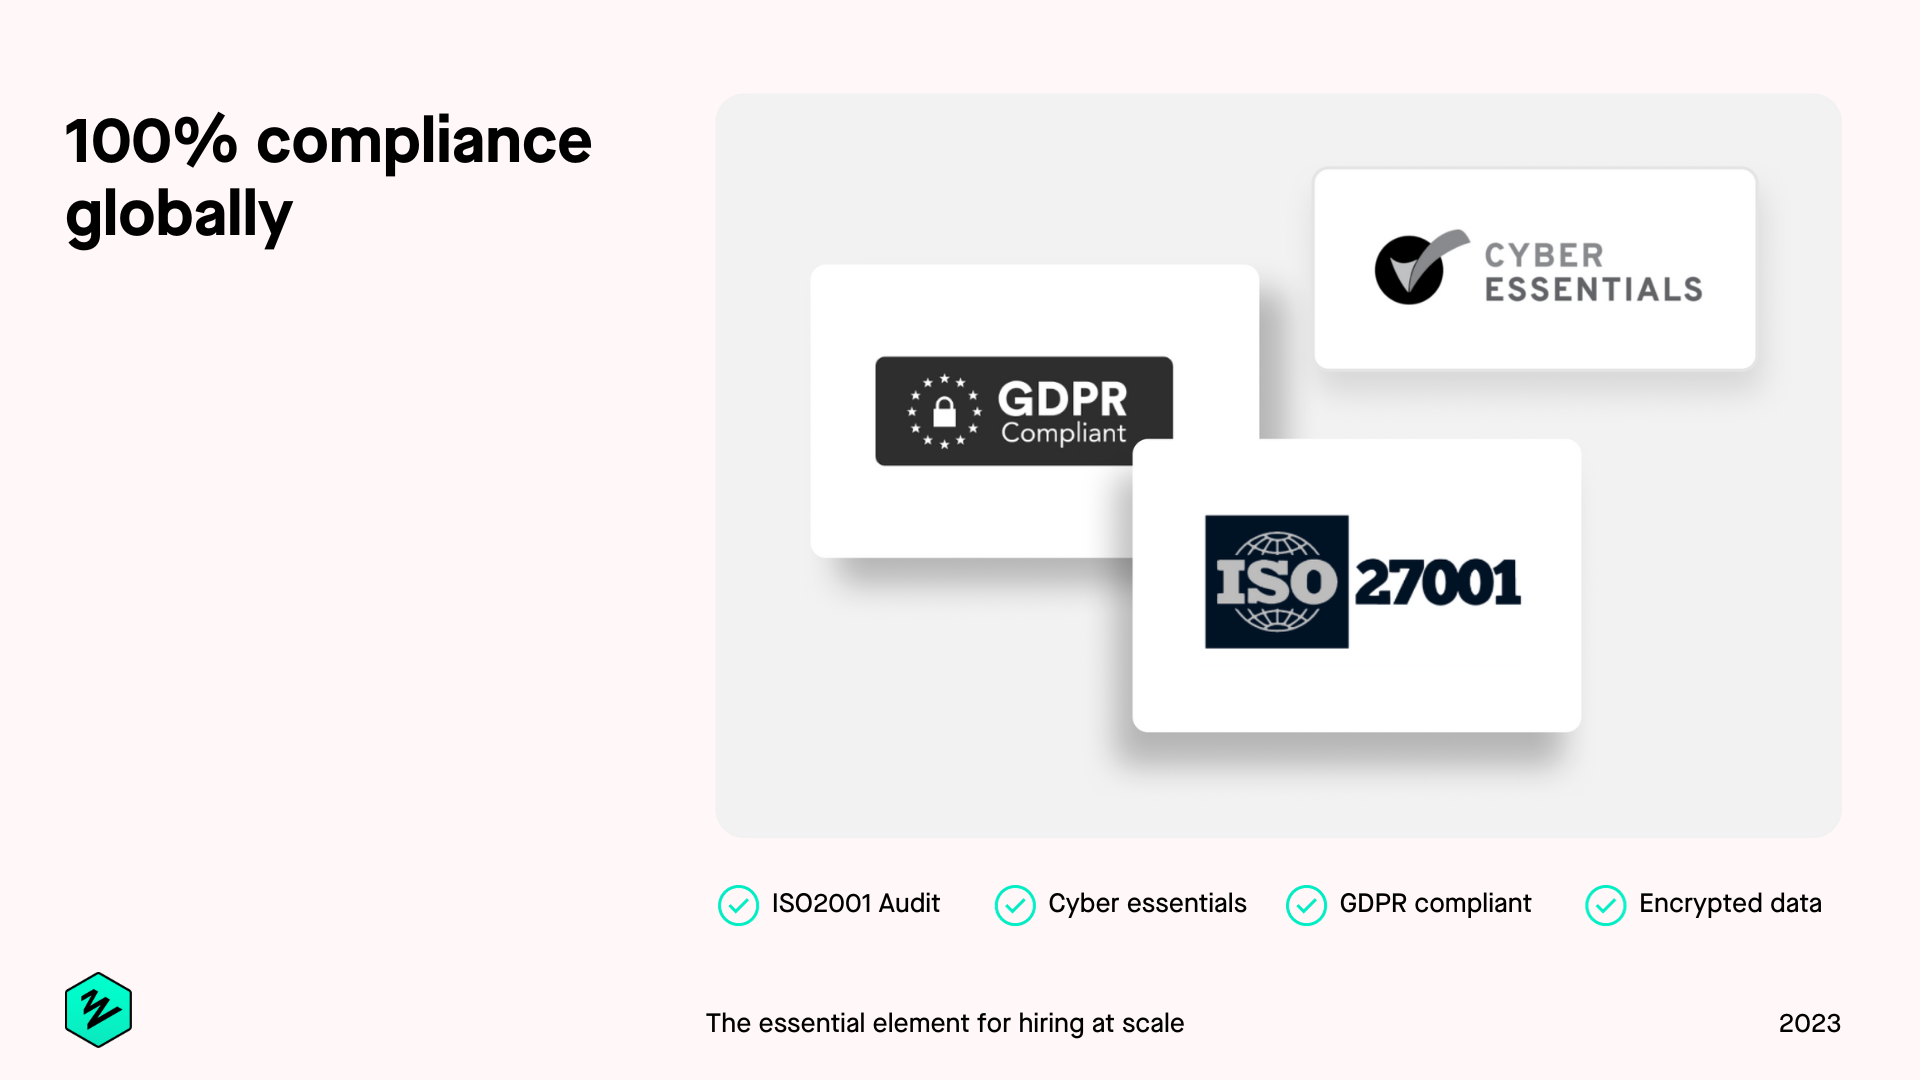 Zinc Software - ISO 27001 certified. GDPR compliant. Securely share candidate profiles with colleagues and view it instantly on any device. Use our globally secure SSO for safe downloads, passwords, or email attachments.